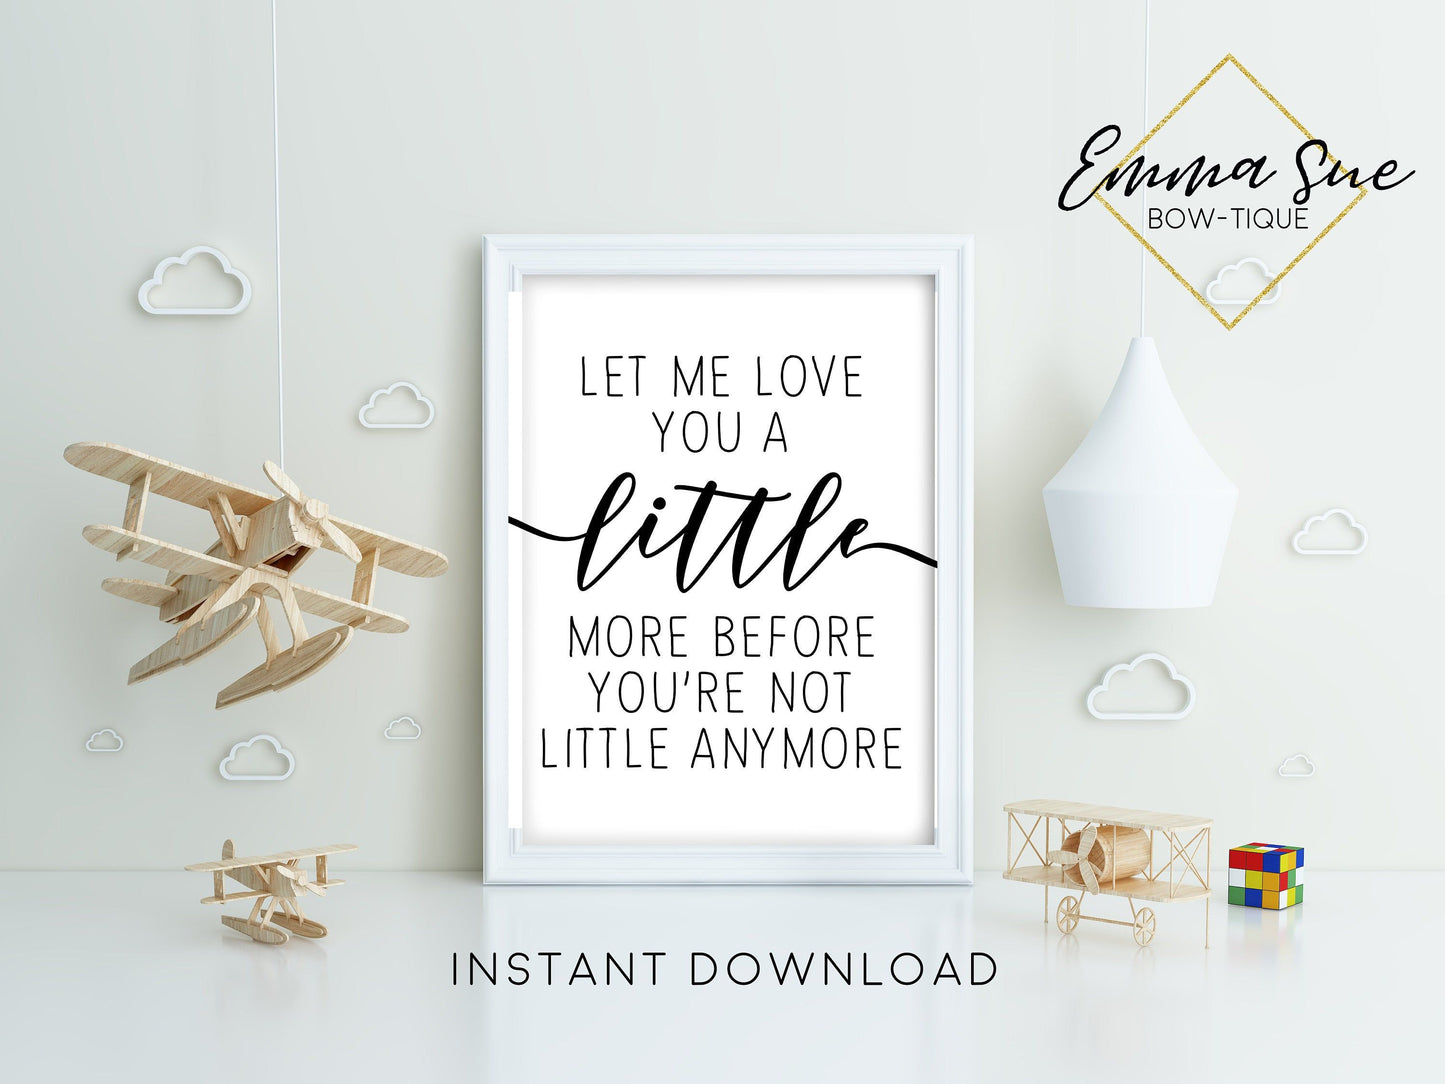 Let me love you a little more before you're not little anymore - Kid's Nursery room Wall Art Printable Sign - Digital File